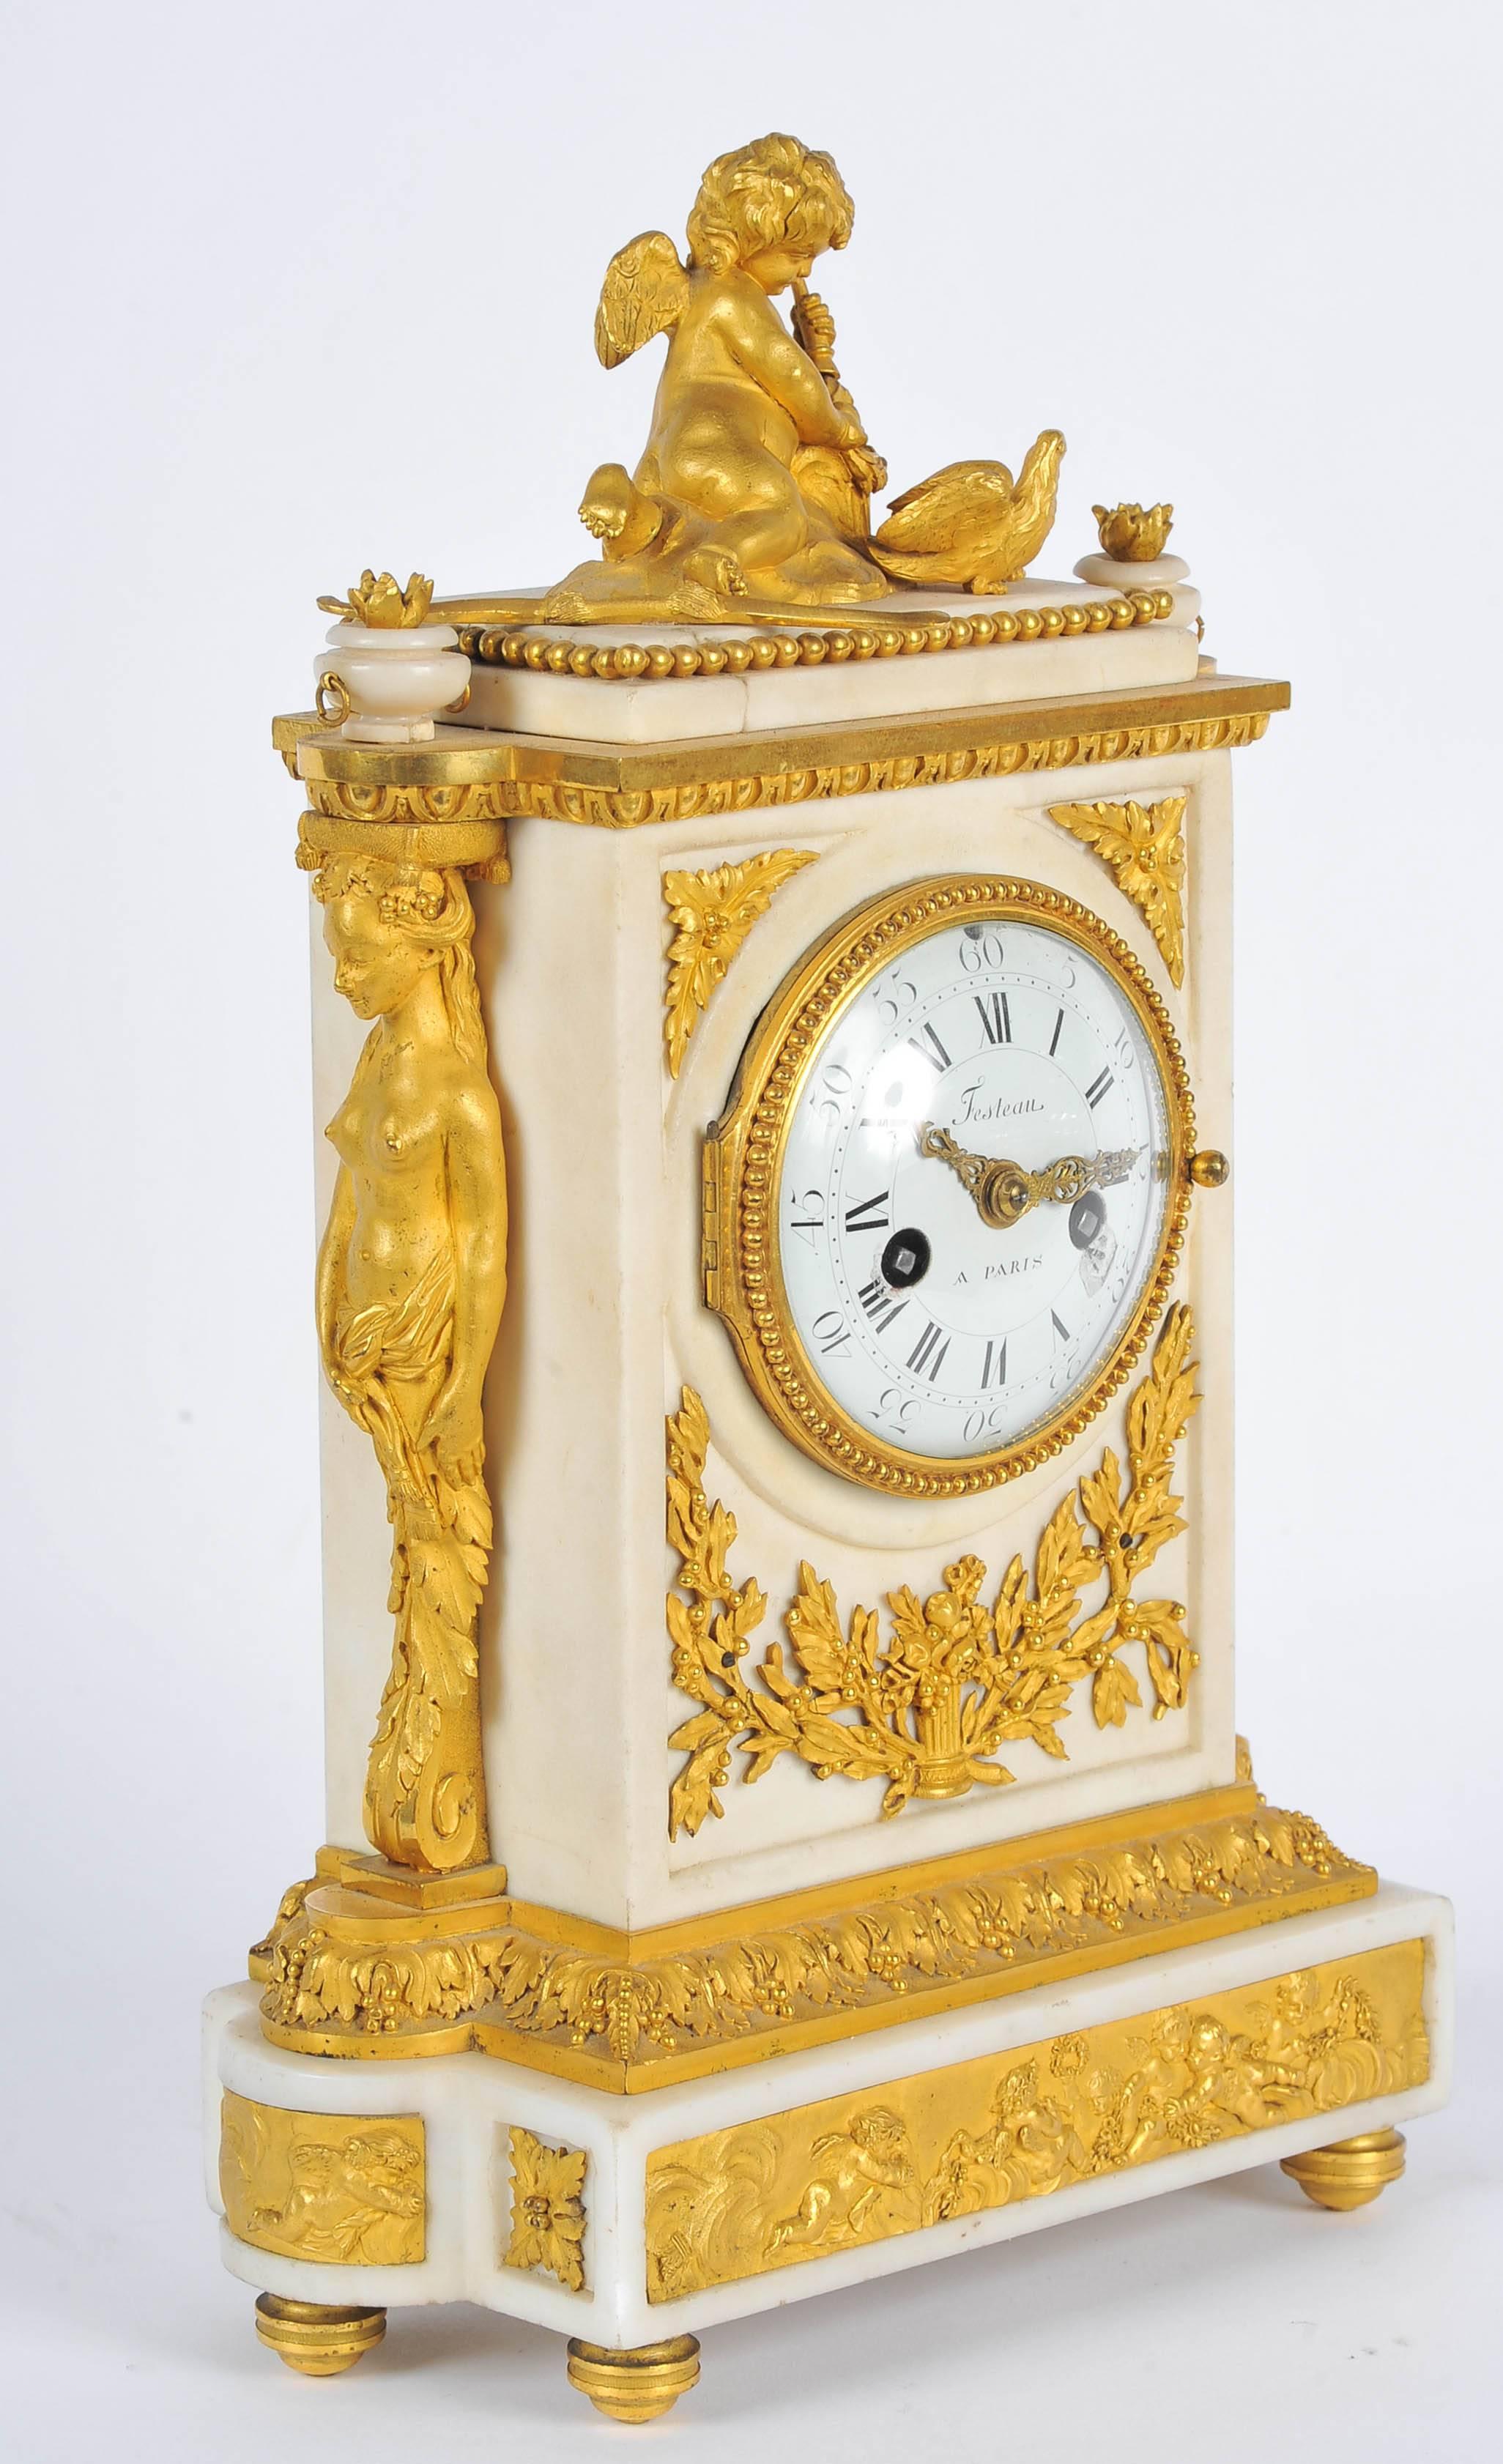 A fine quality French 19th century gilded ormolu and white marble mantel clock, signed Festeau of Paris. Having a cherub with a bow and arrow on top, the enameled clock face with eight day chiming movement. A pair of caryatids mounted on either side